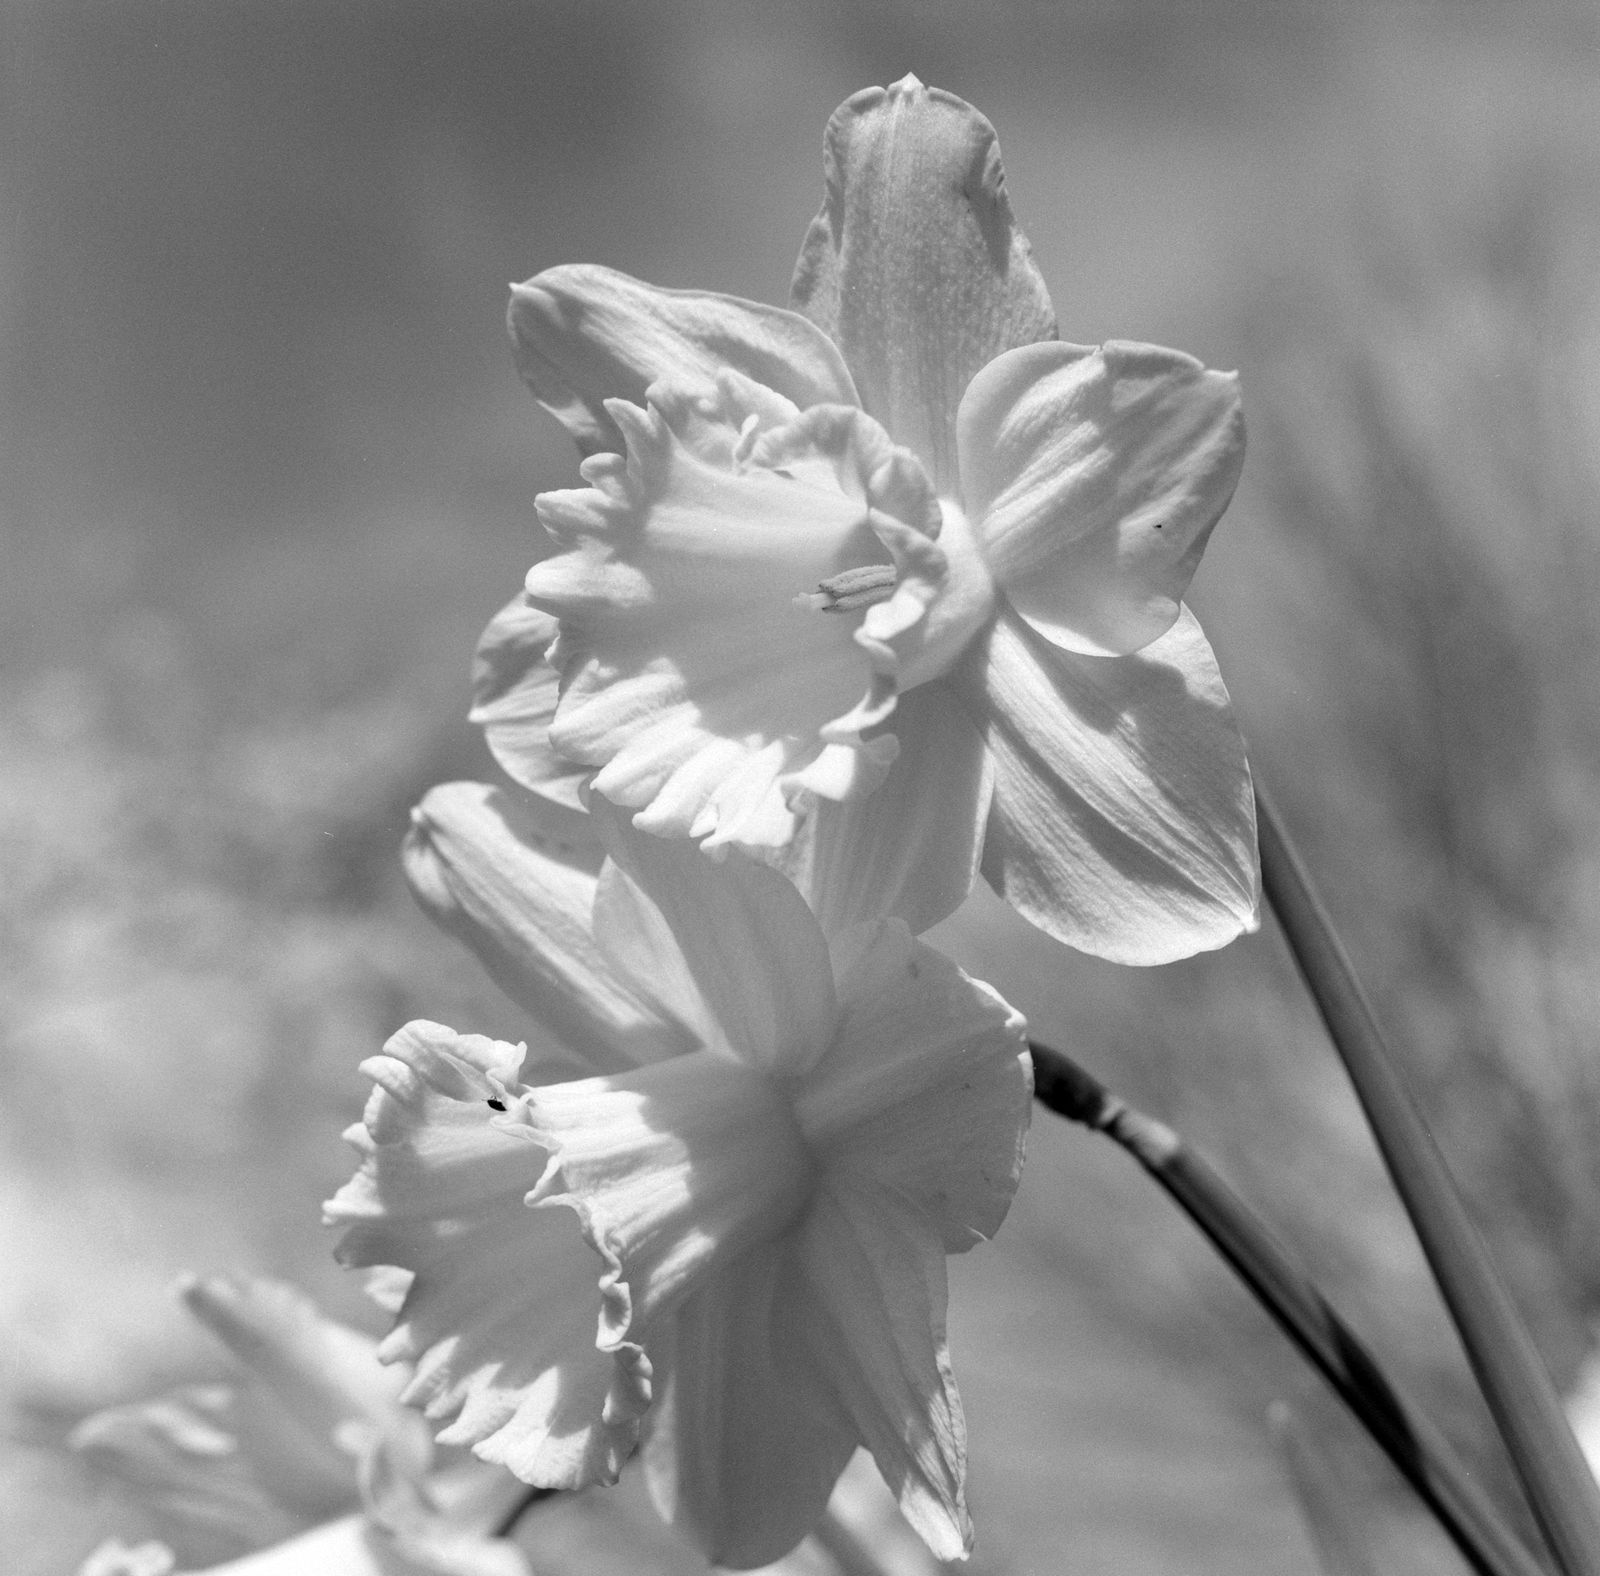 @PhlStrchn Some of my favourite photographs taken on Ilford HP5+ film over the past couple of months. Ilford HP5+ (120) at ISO400 (I used a yellow filter when taking the shots of the daffodils.) Mamiya C220 #ilfordphoto #fridayfavourites #madewithHP5